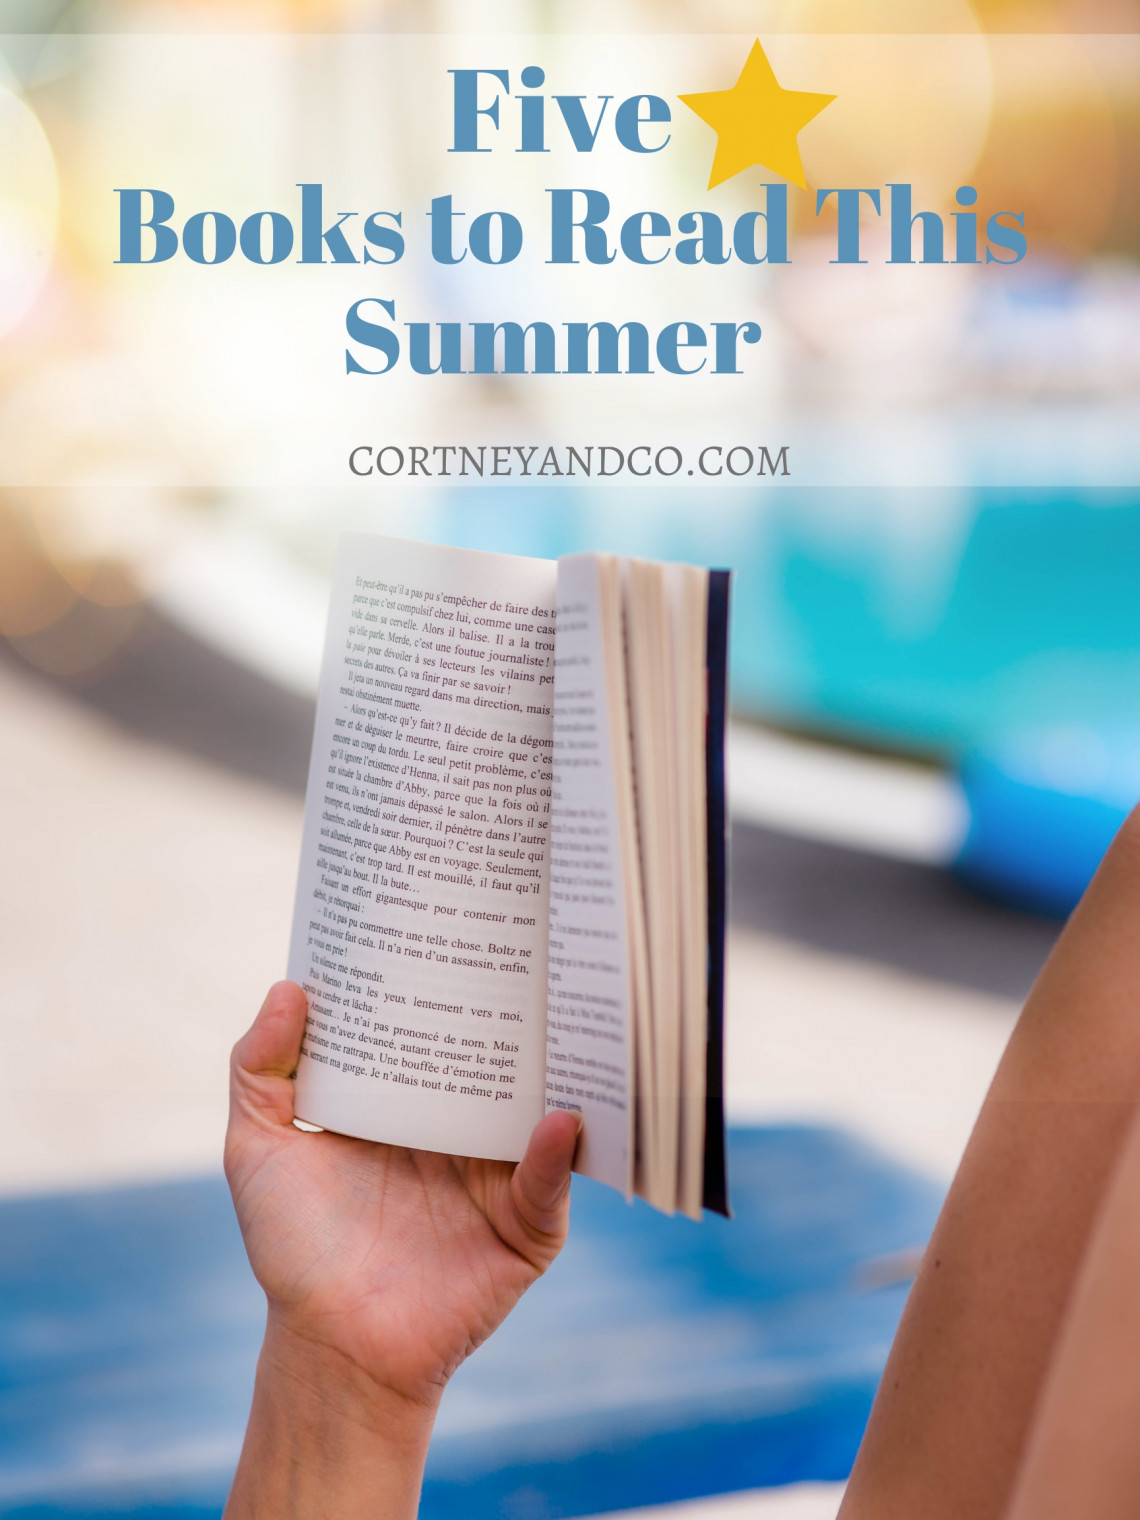 5 Star Books to Read This Summer